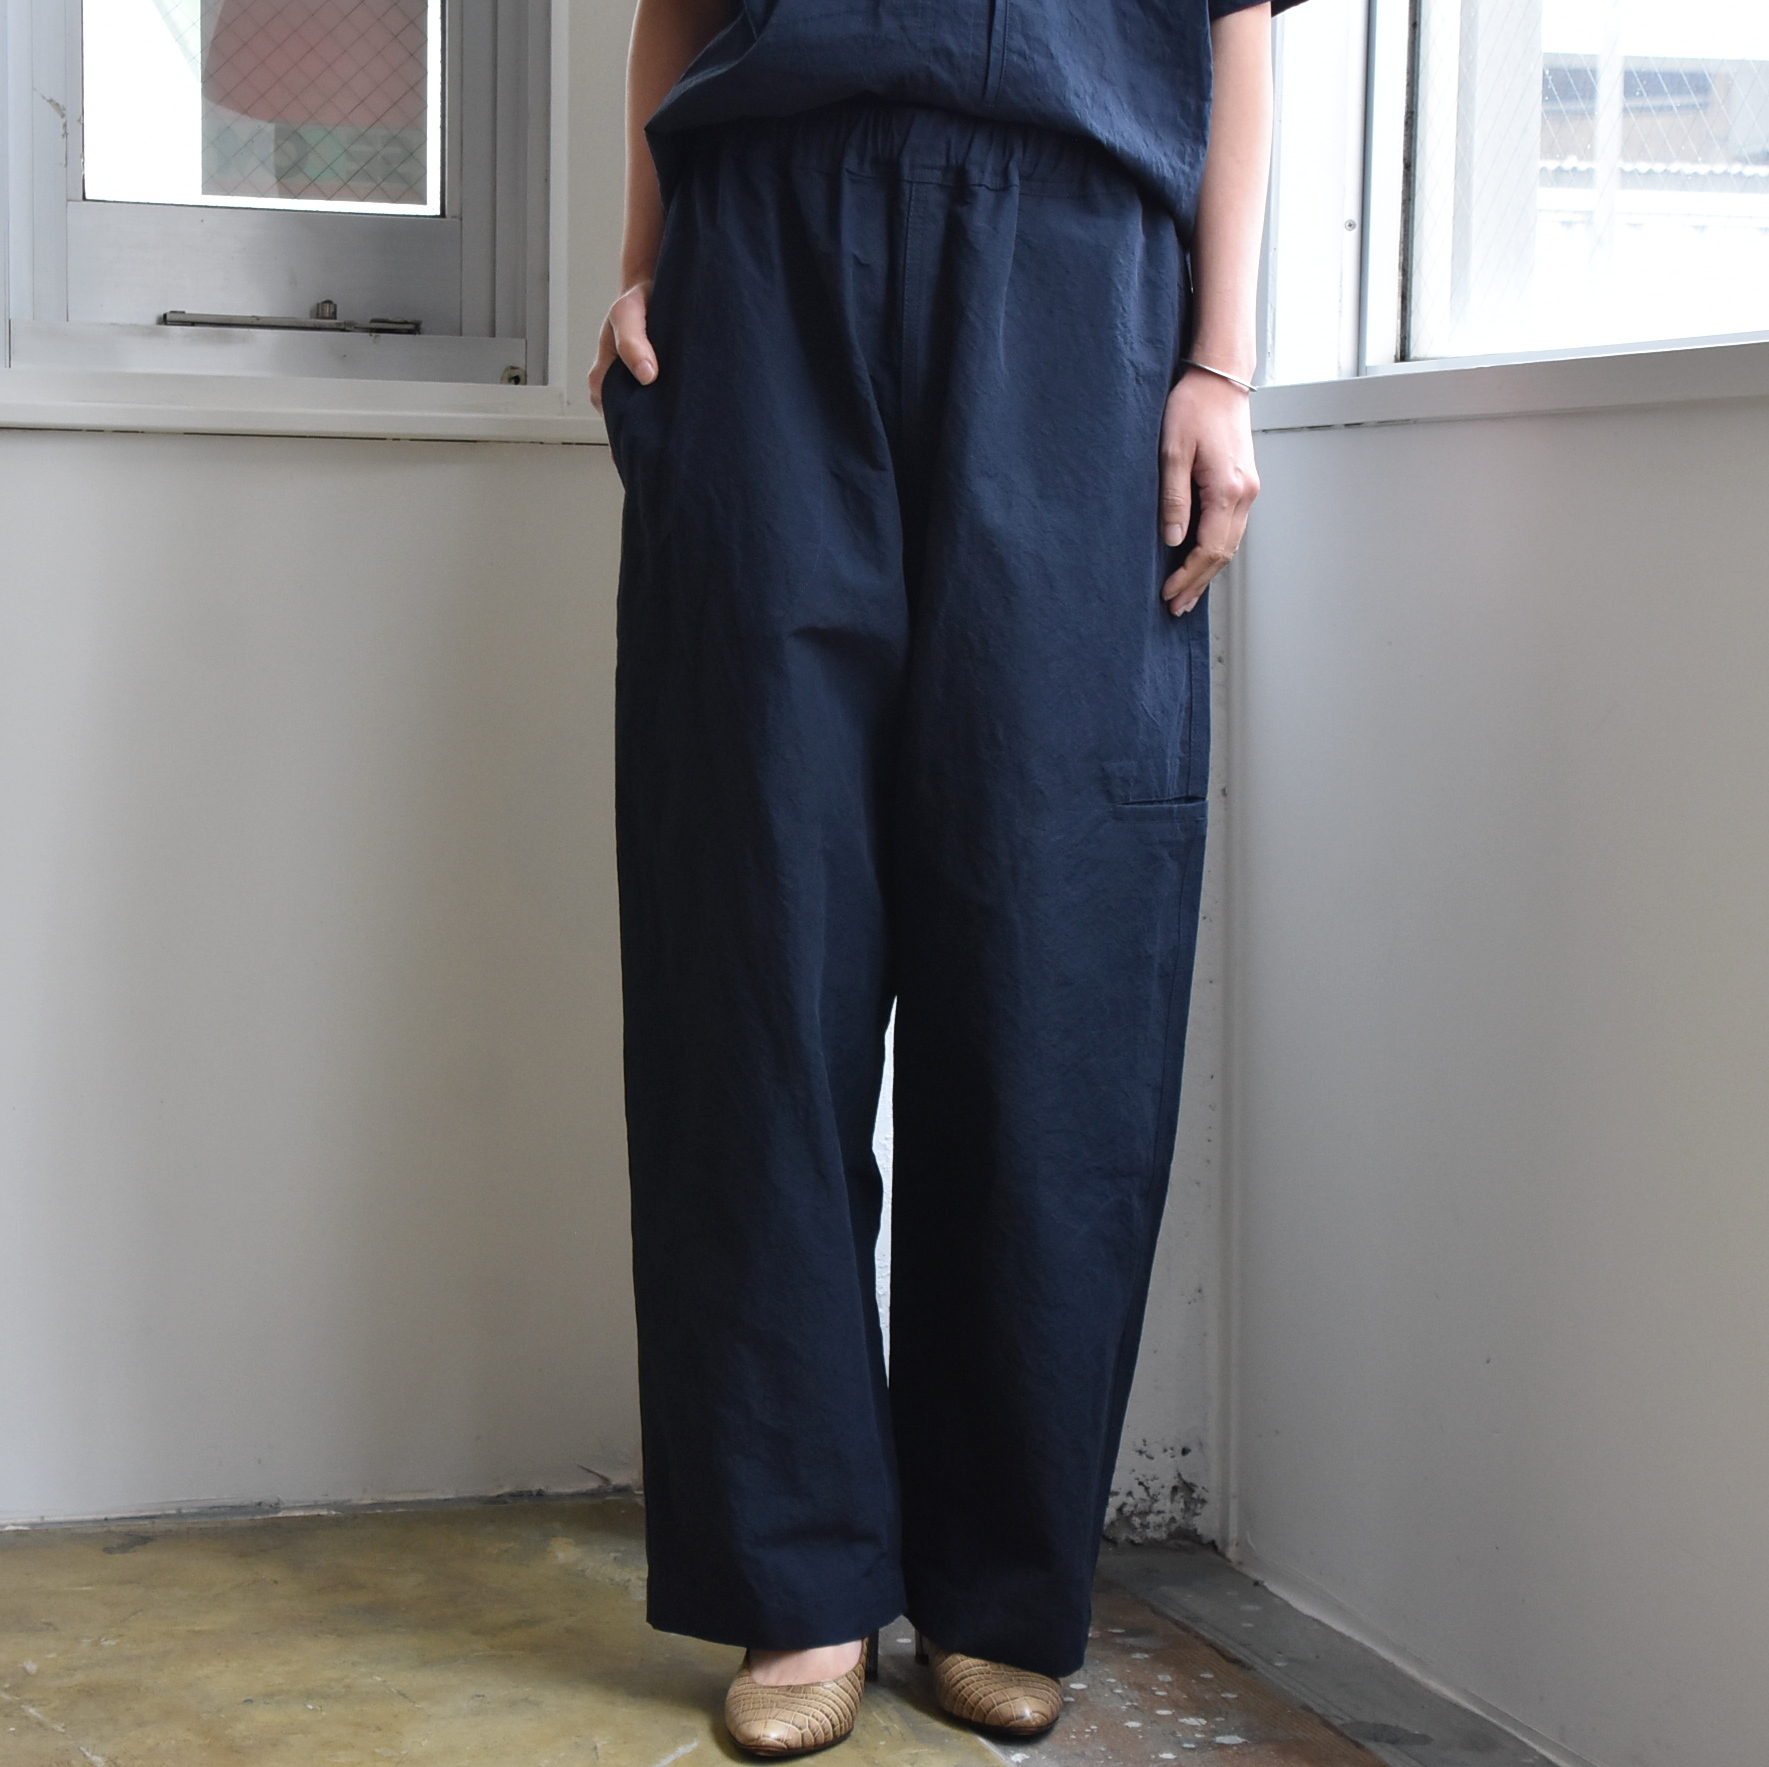 SOFIE D'HOORE(\tB[h[) / Wide pants with elastic waist thigh pockety2FWJz#PLUCK-AA(4)